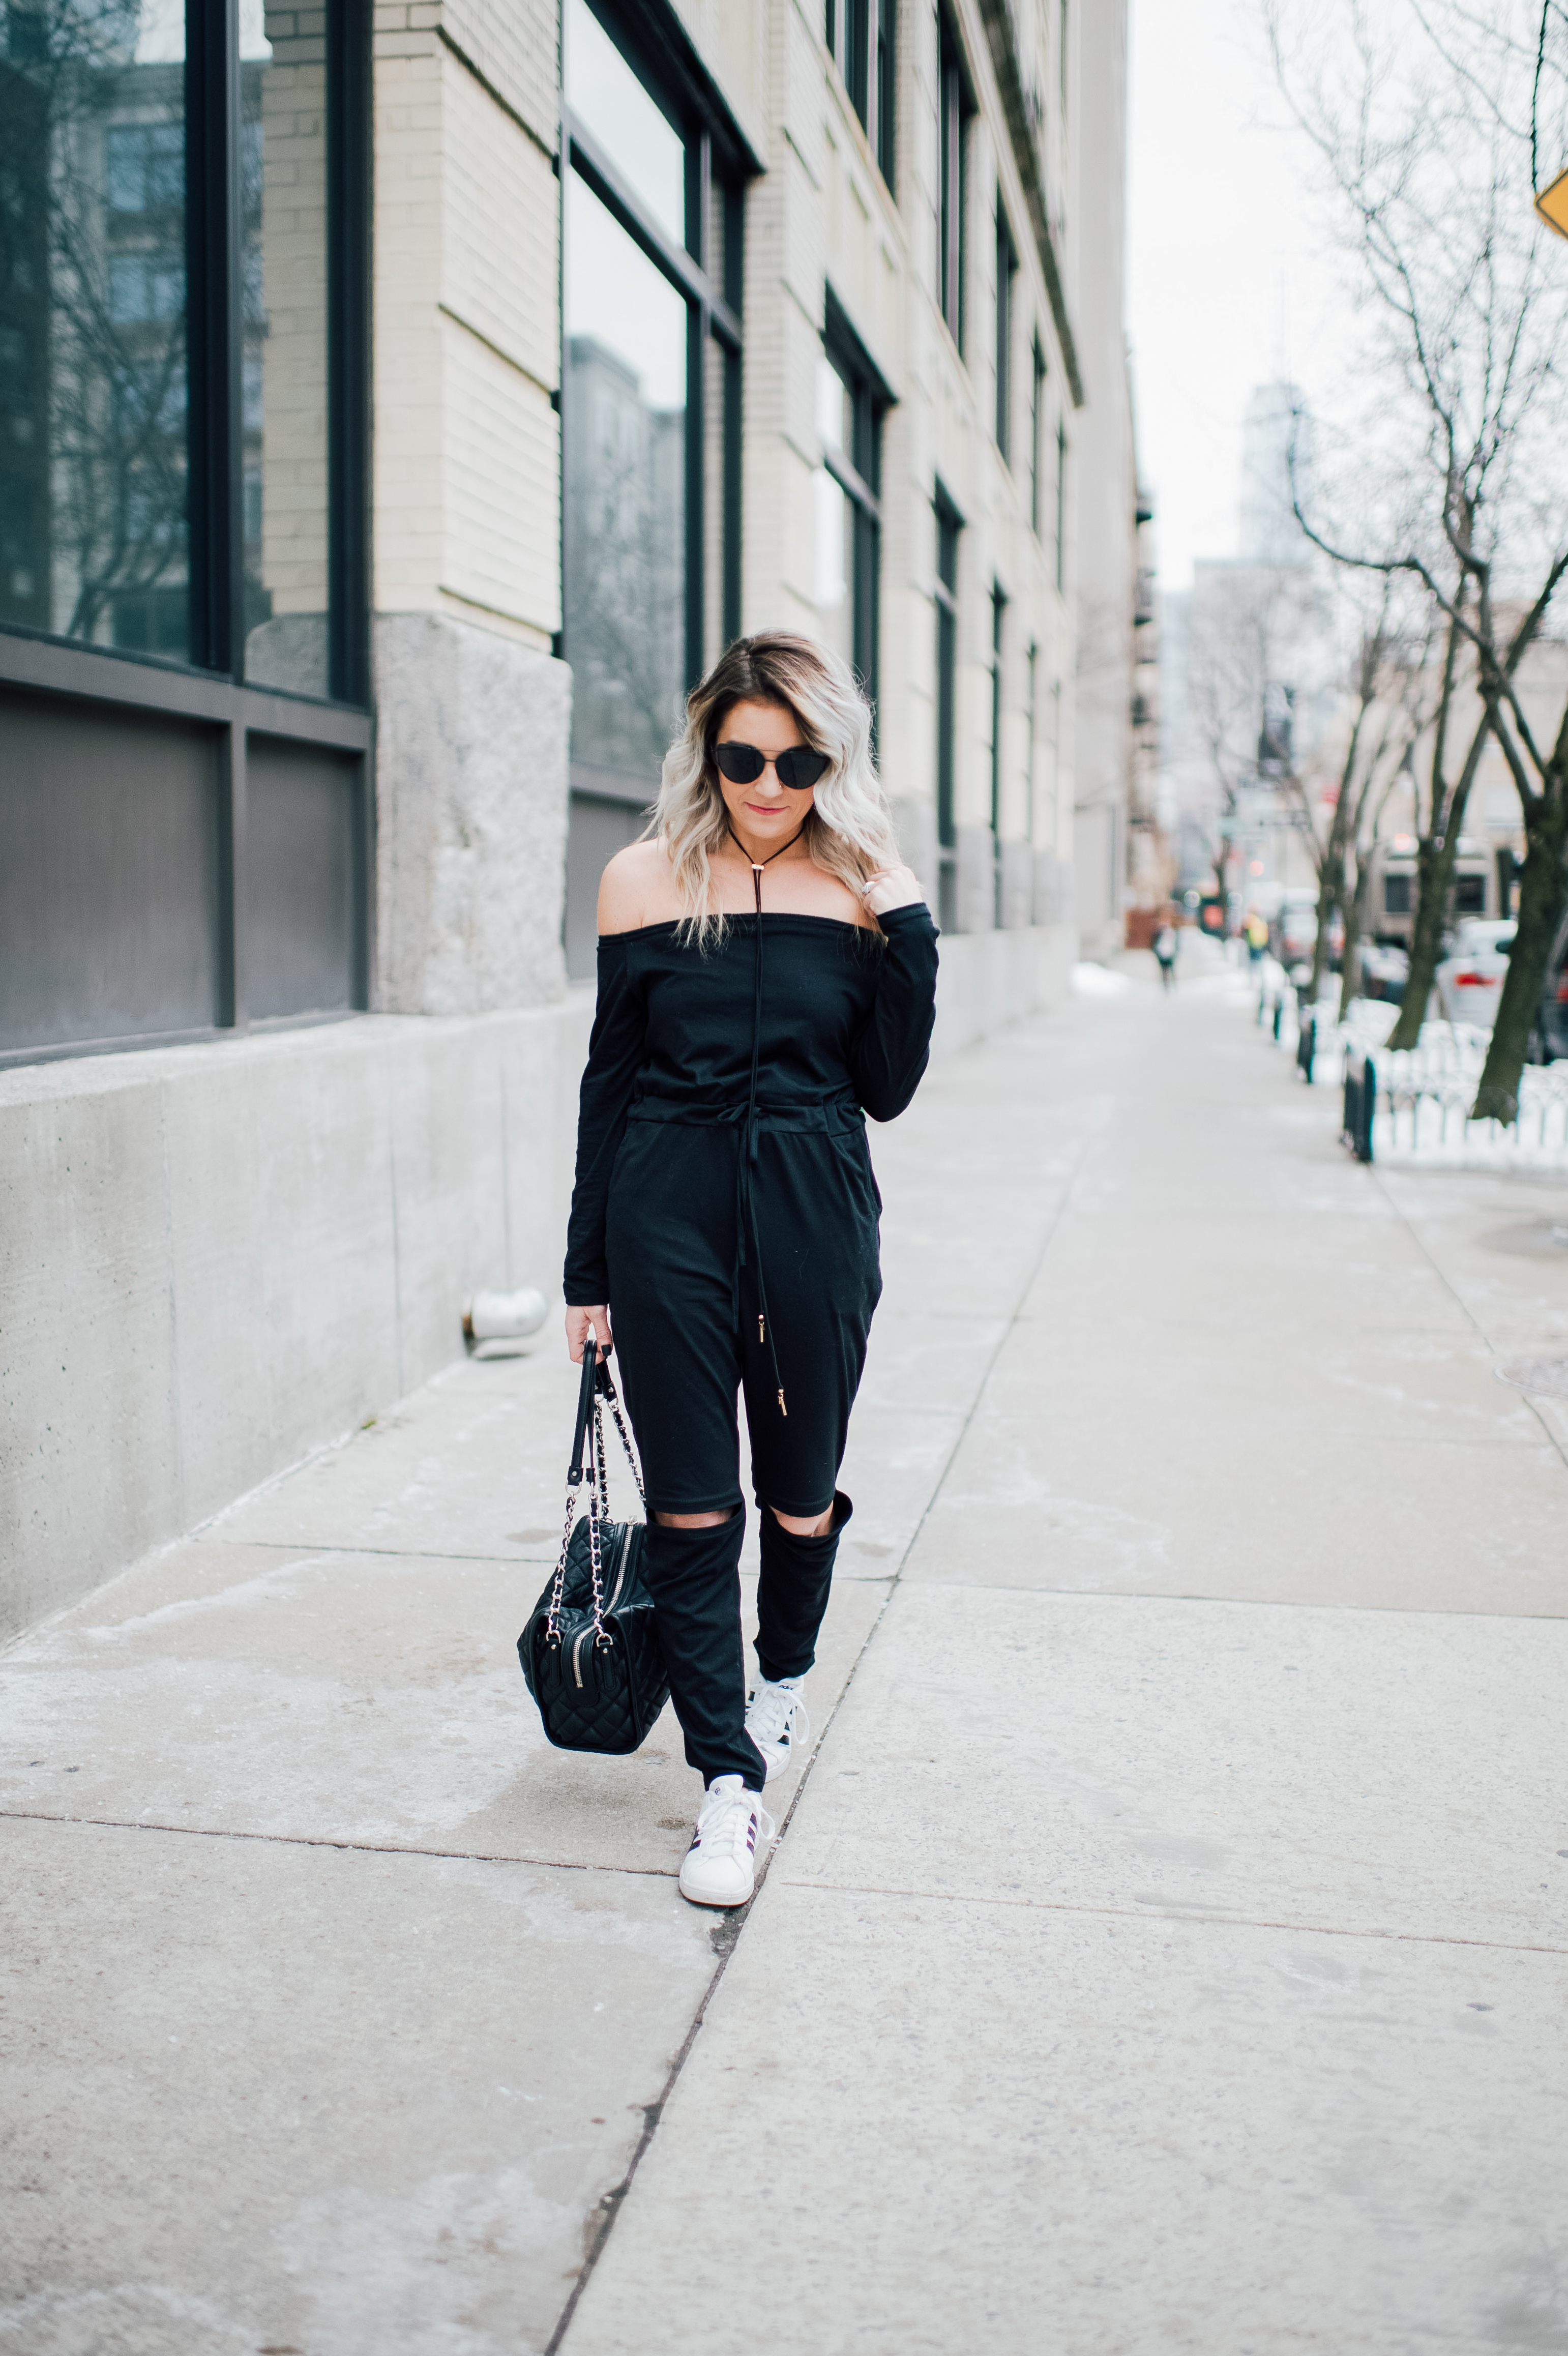 Currently crushing: jumpsuits for women. They are the perfect choice for casual weekend wear or a night out with the girls. Day to night look...check! 